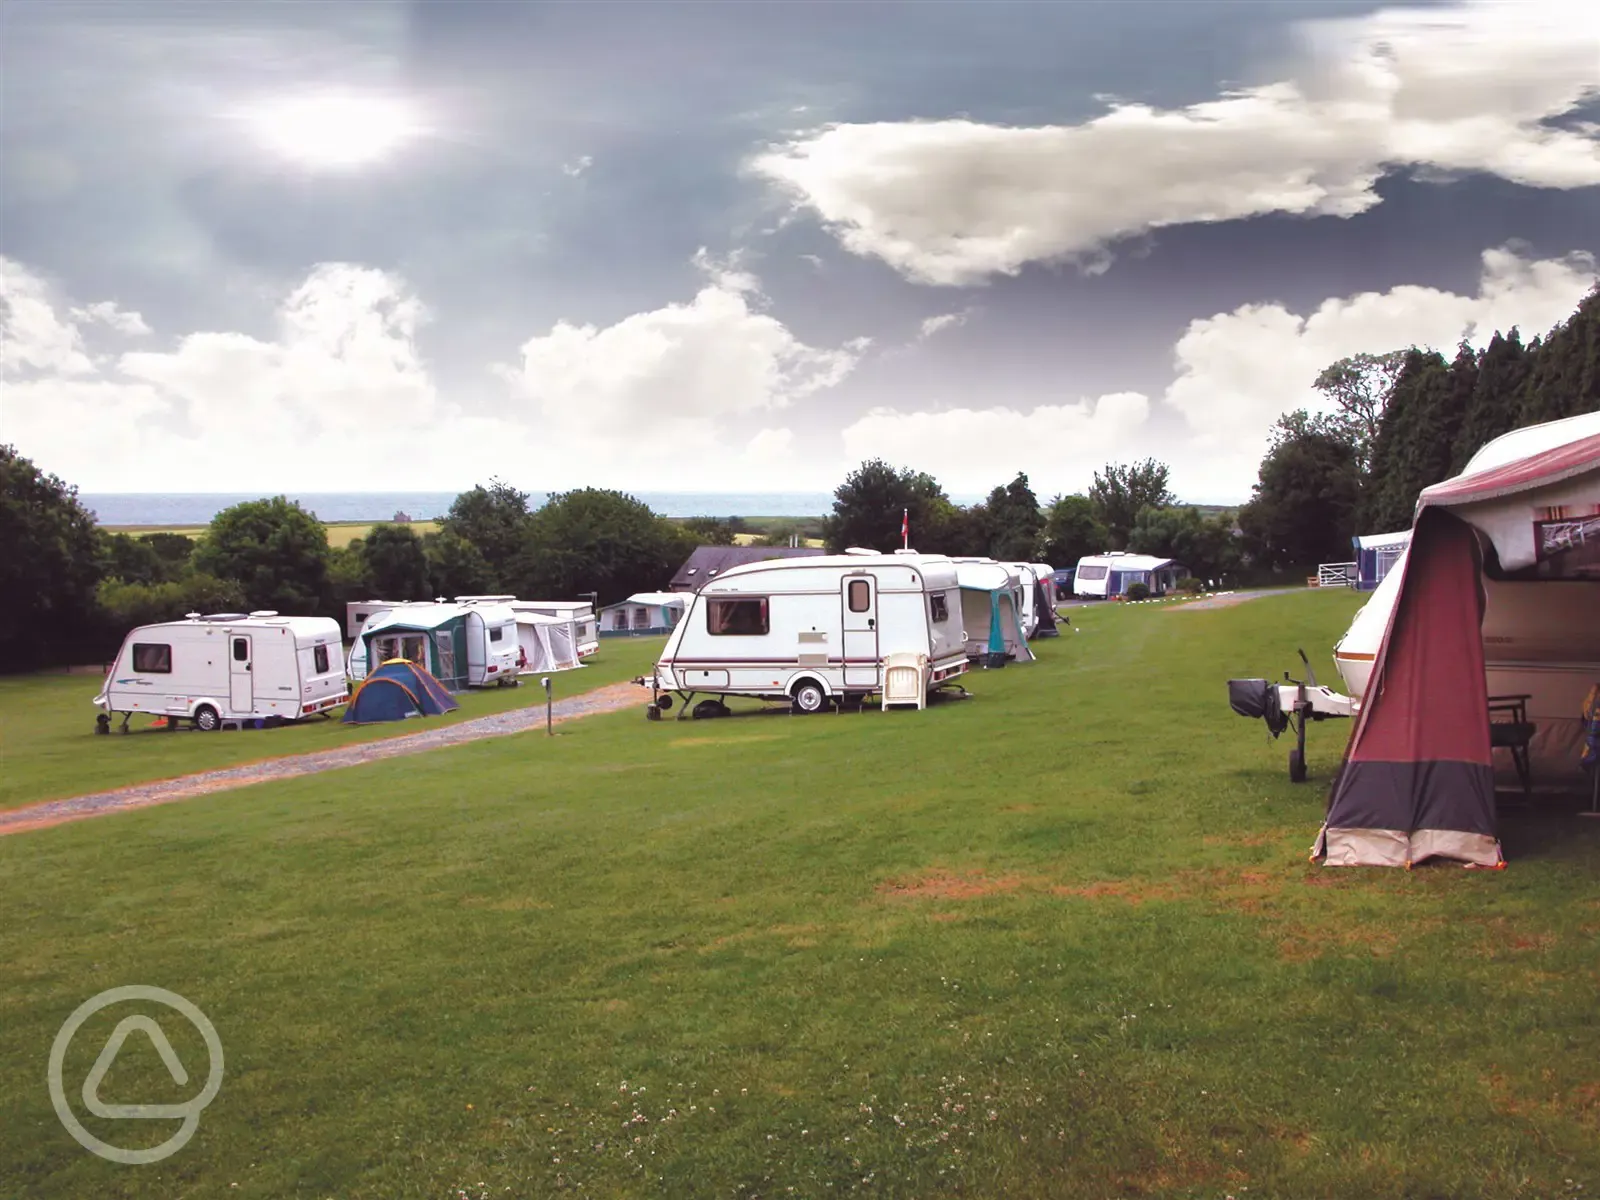 Llanystumdwy Camping and Caravanning Club Site